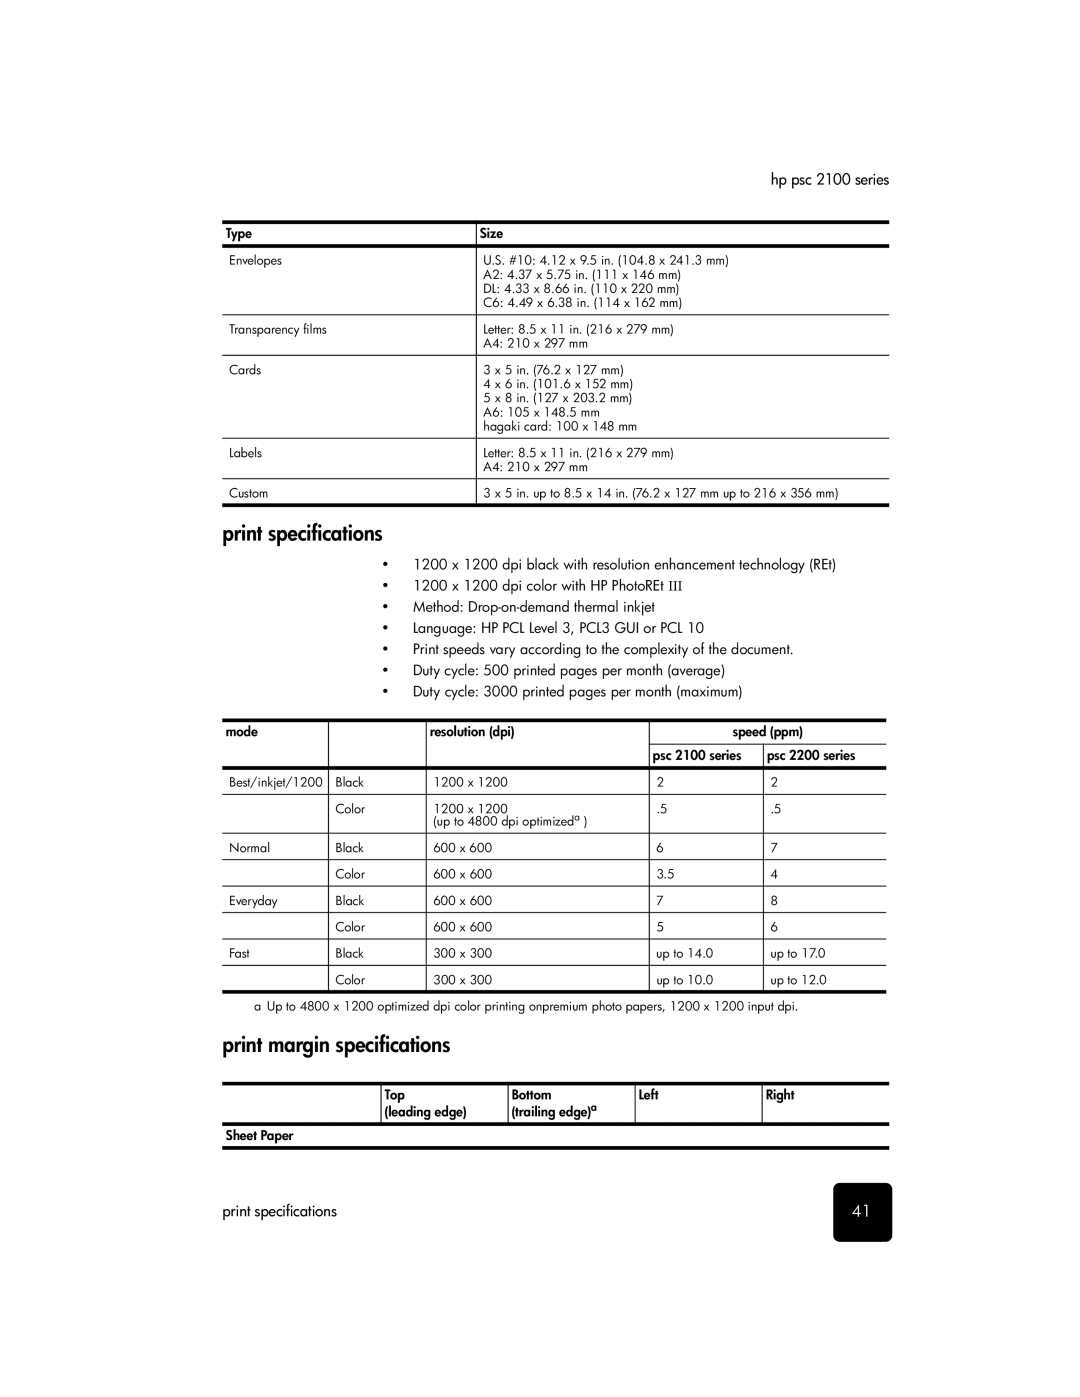 HP 2100 manual Print specifications, Print margin specifications 